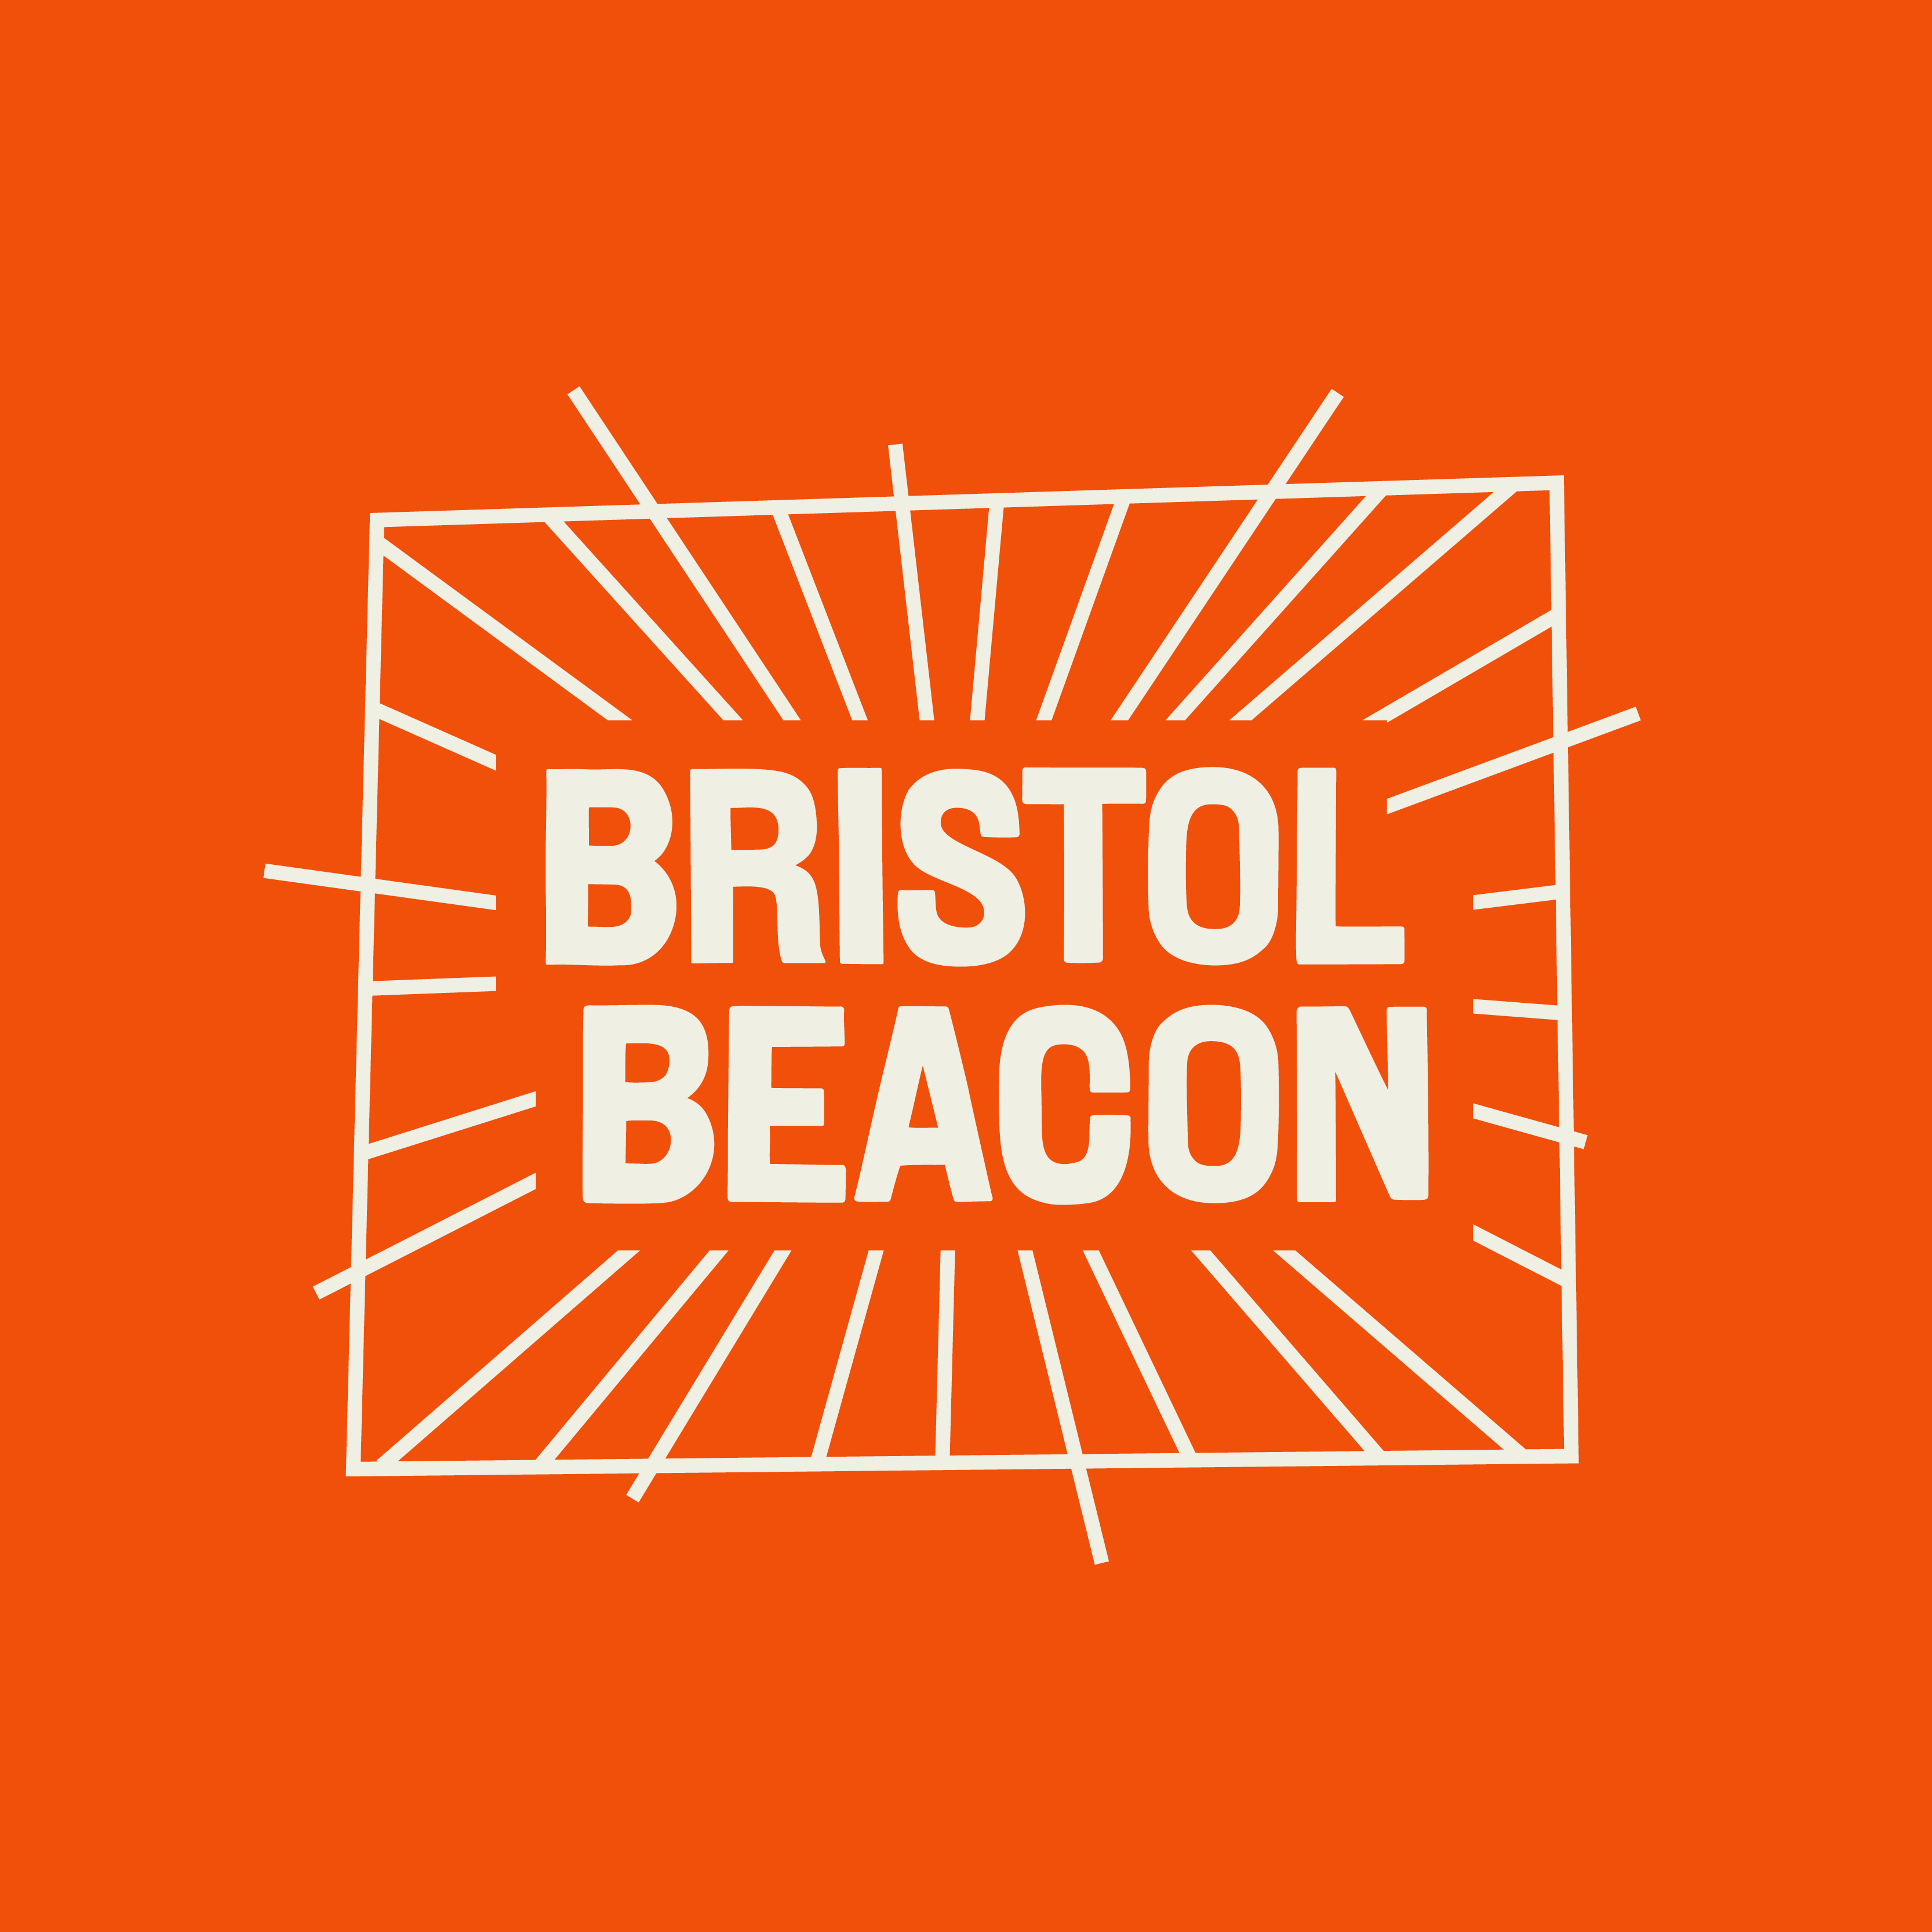 Bristol Beacon to broadcast London Symphony Orchestra concert at Bath Forum to care homes across the country as thank you to staff and residents